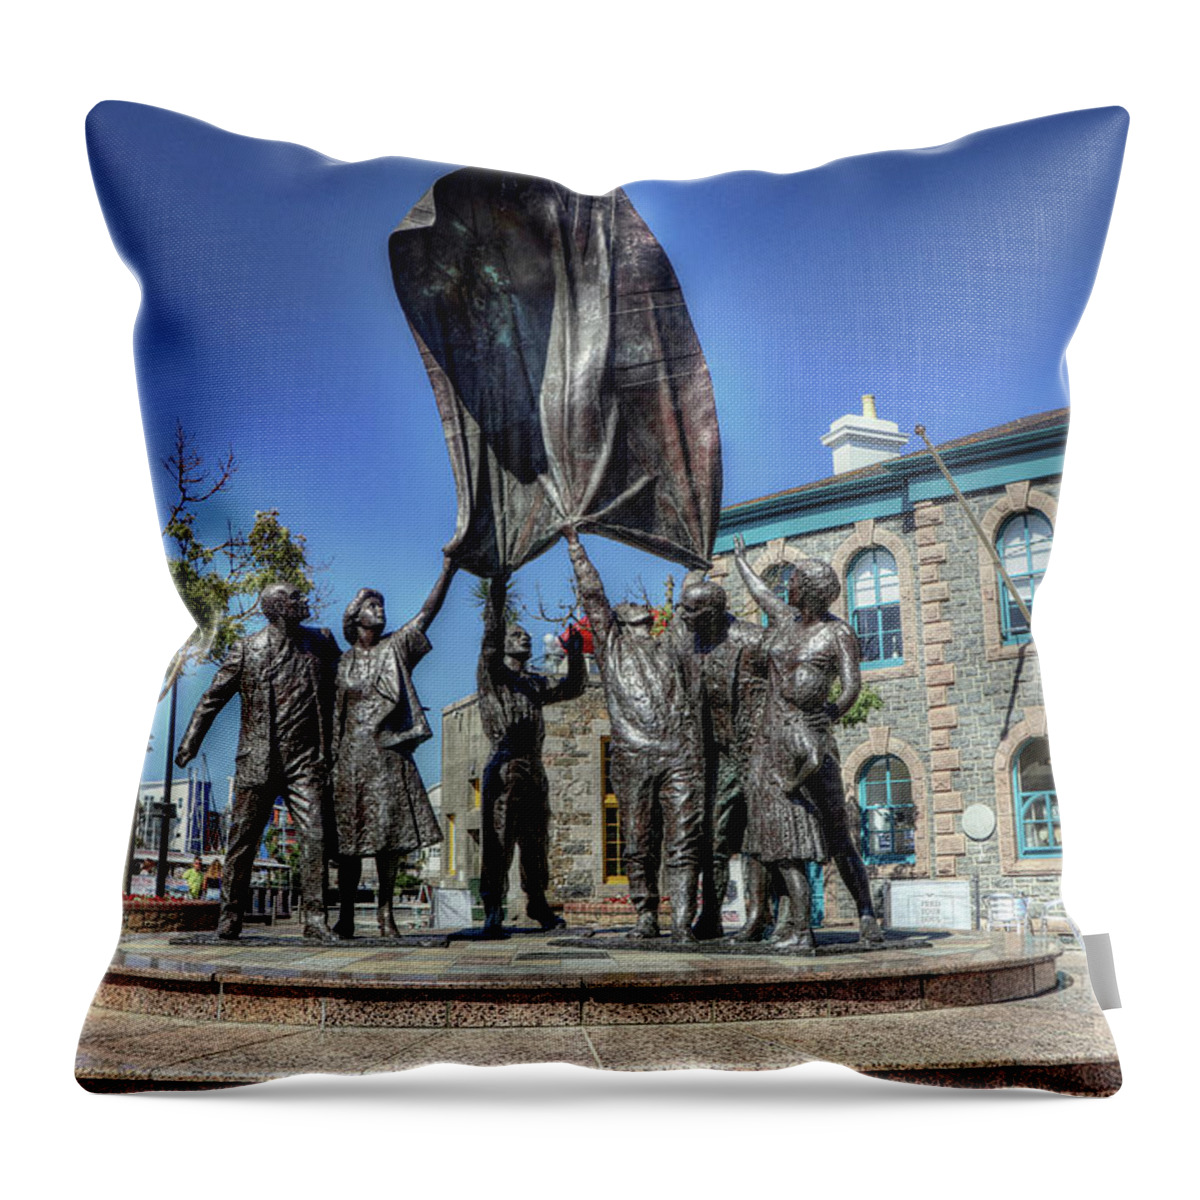 Jersey Channel Islands United Kingdom Throw Pillow featuring the photograph Jersey Channel Islands United Kingdom #4 by Paul James Bannerman